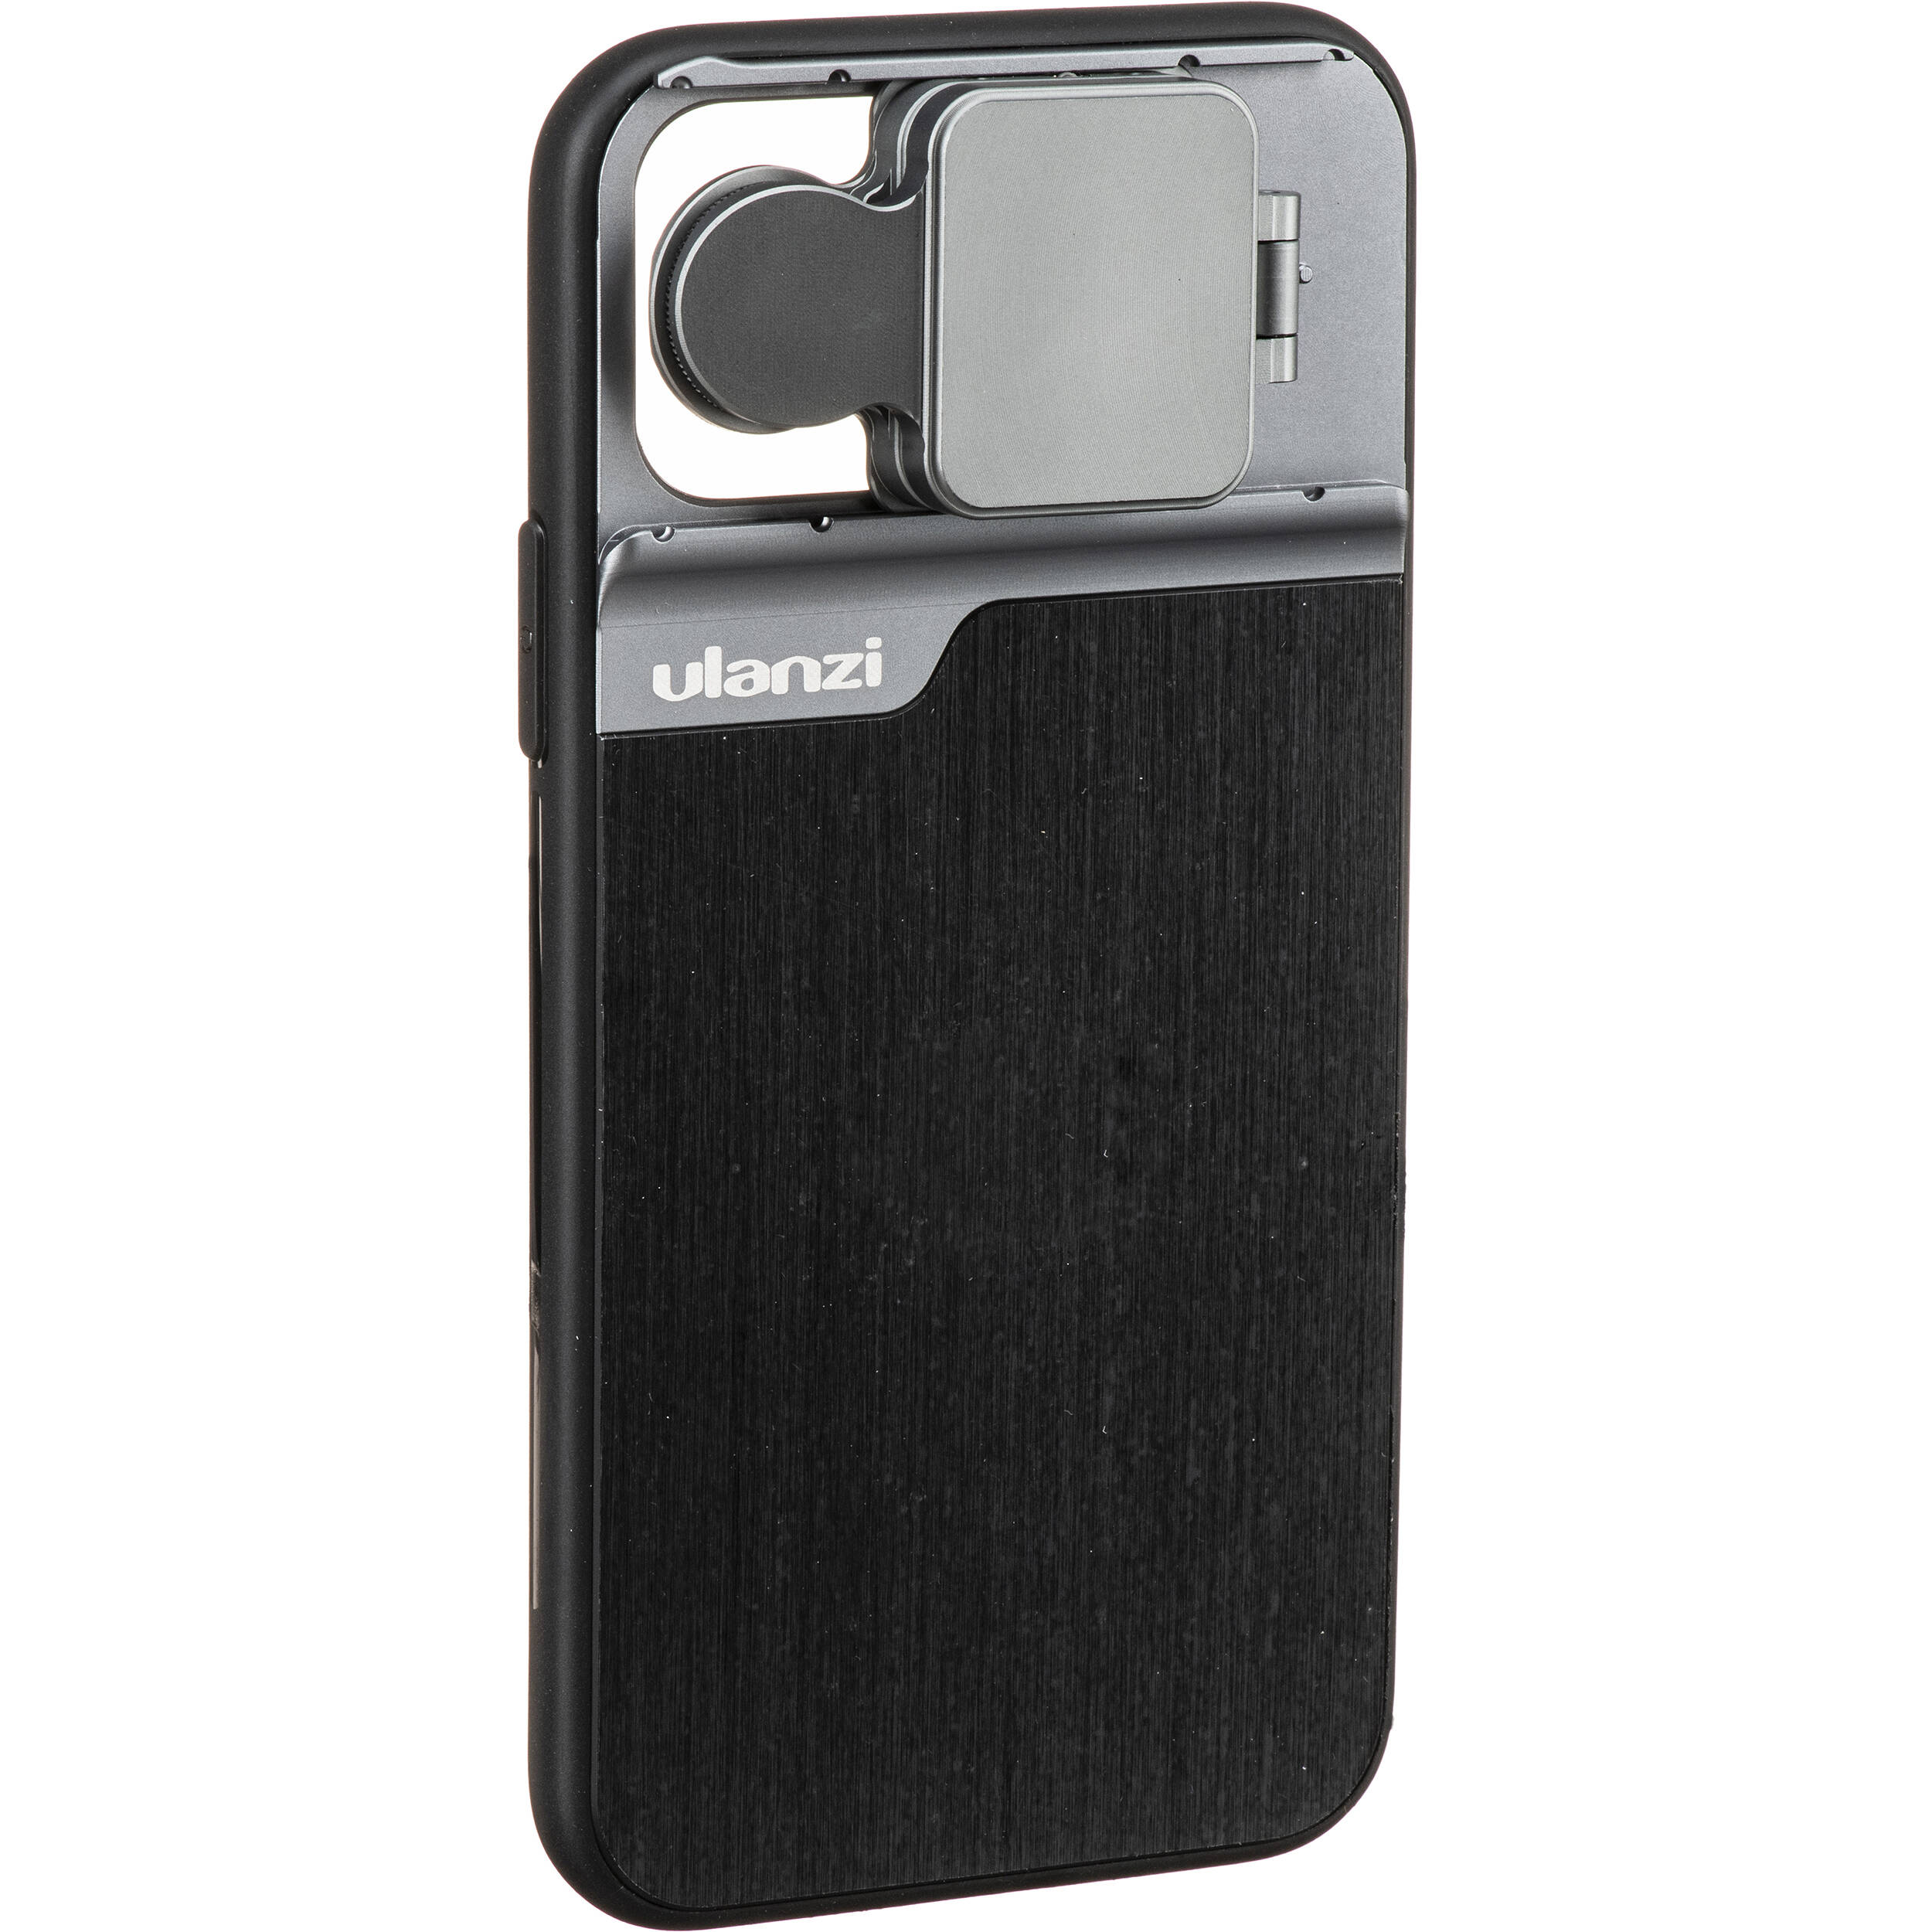 Ulanzi ULens MultiLens Case for iPhone 11 Pro 1732 BH Photo